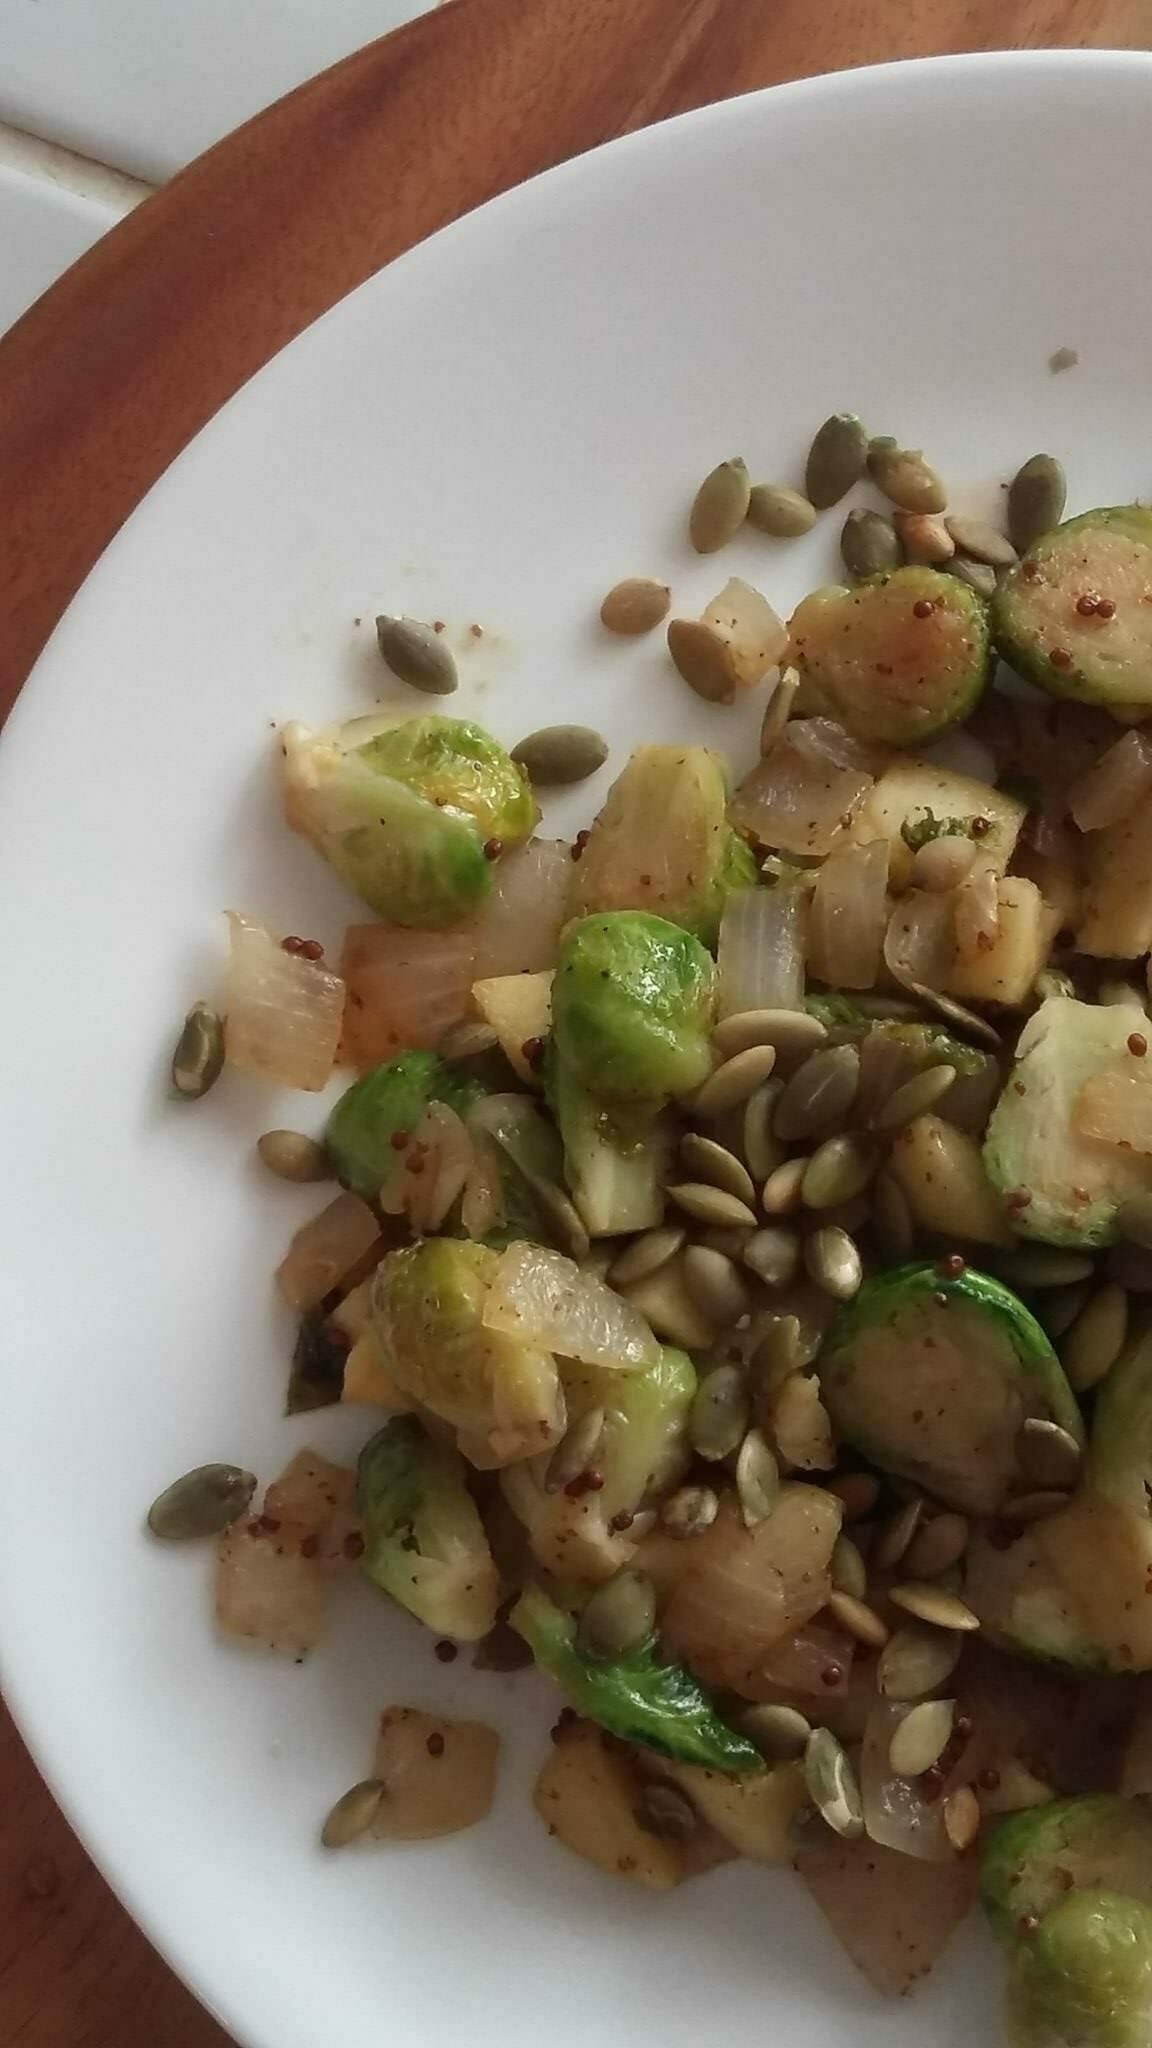 Brussels sprouts recipe